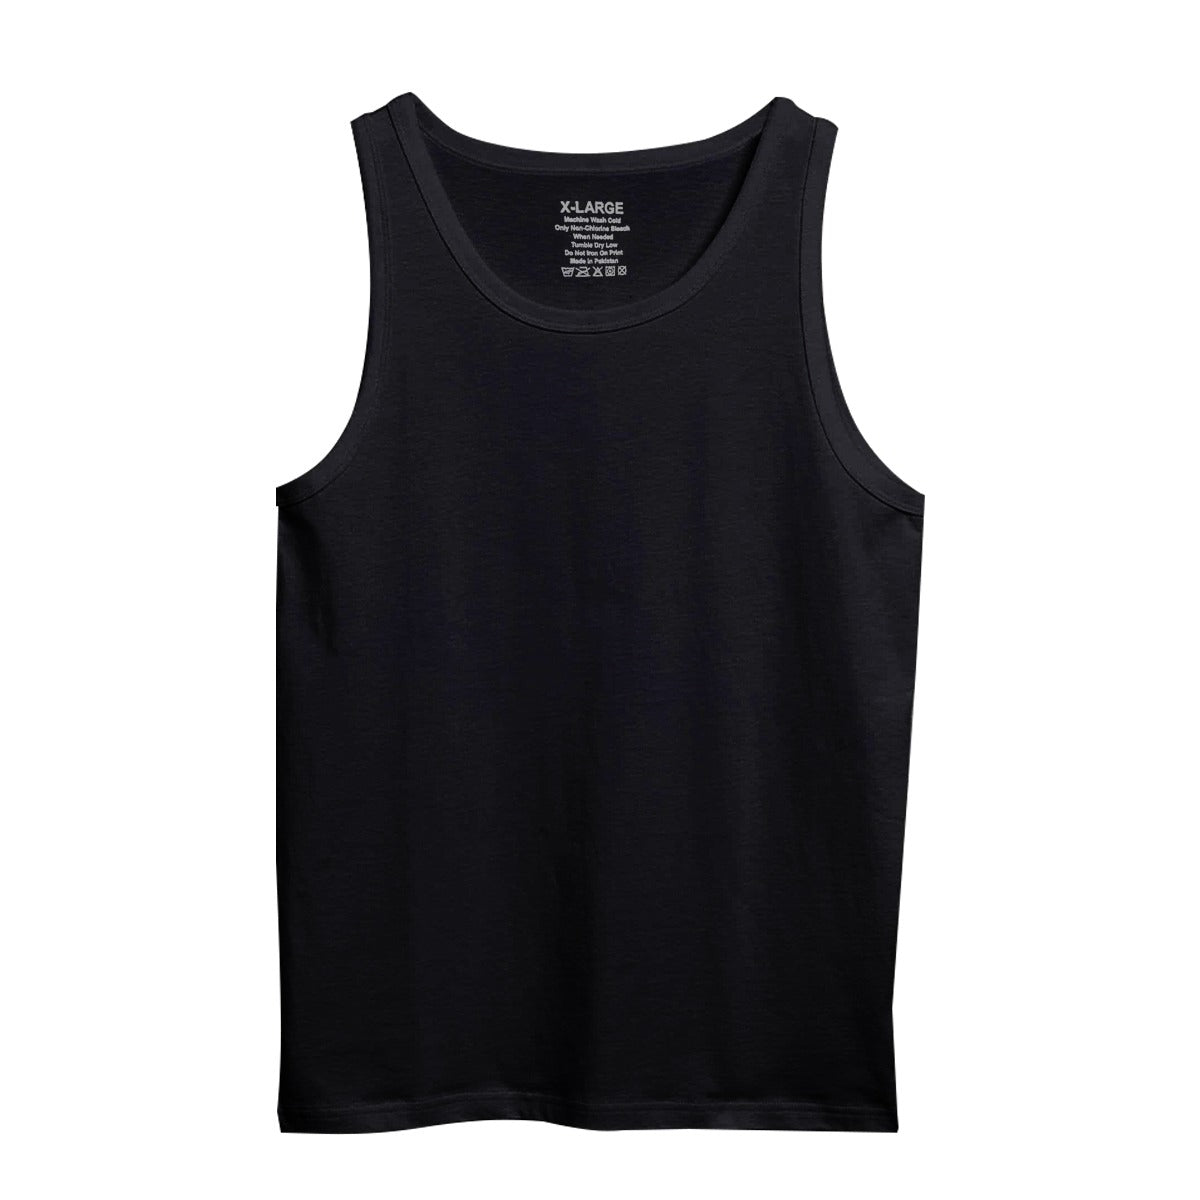 PACK OF 3 BLACK COTTON VEST : Buy Online At Best Prices In Pakistan ...